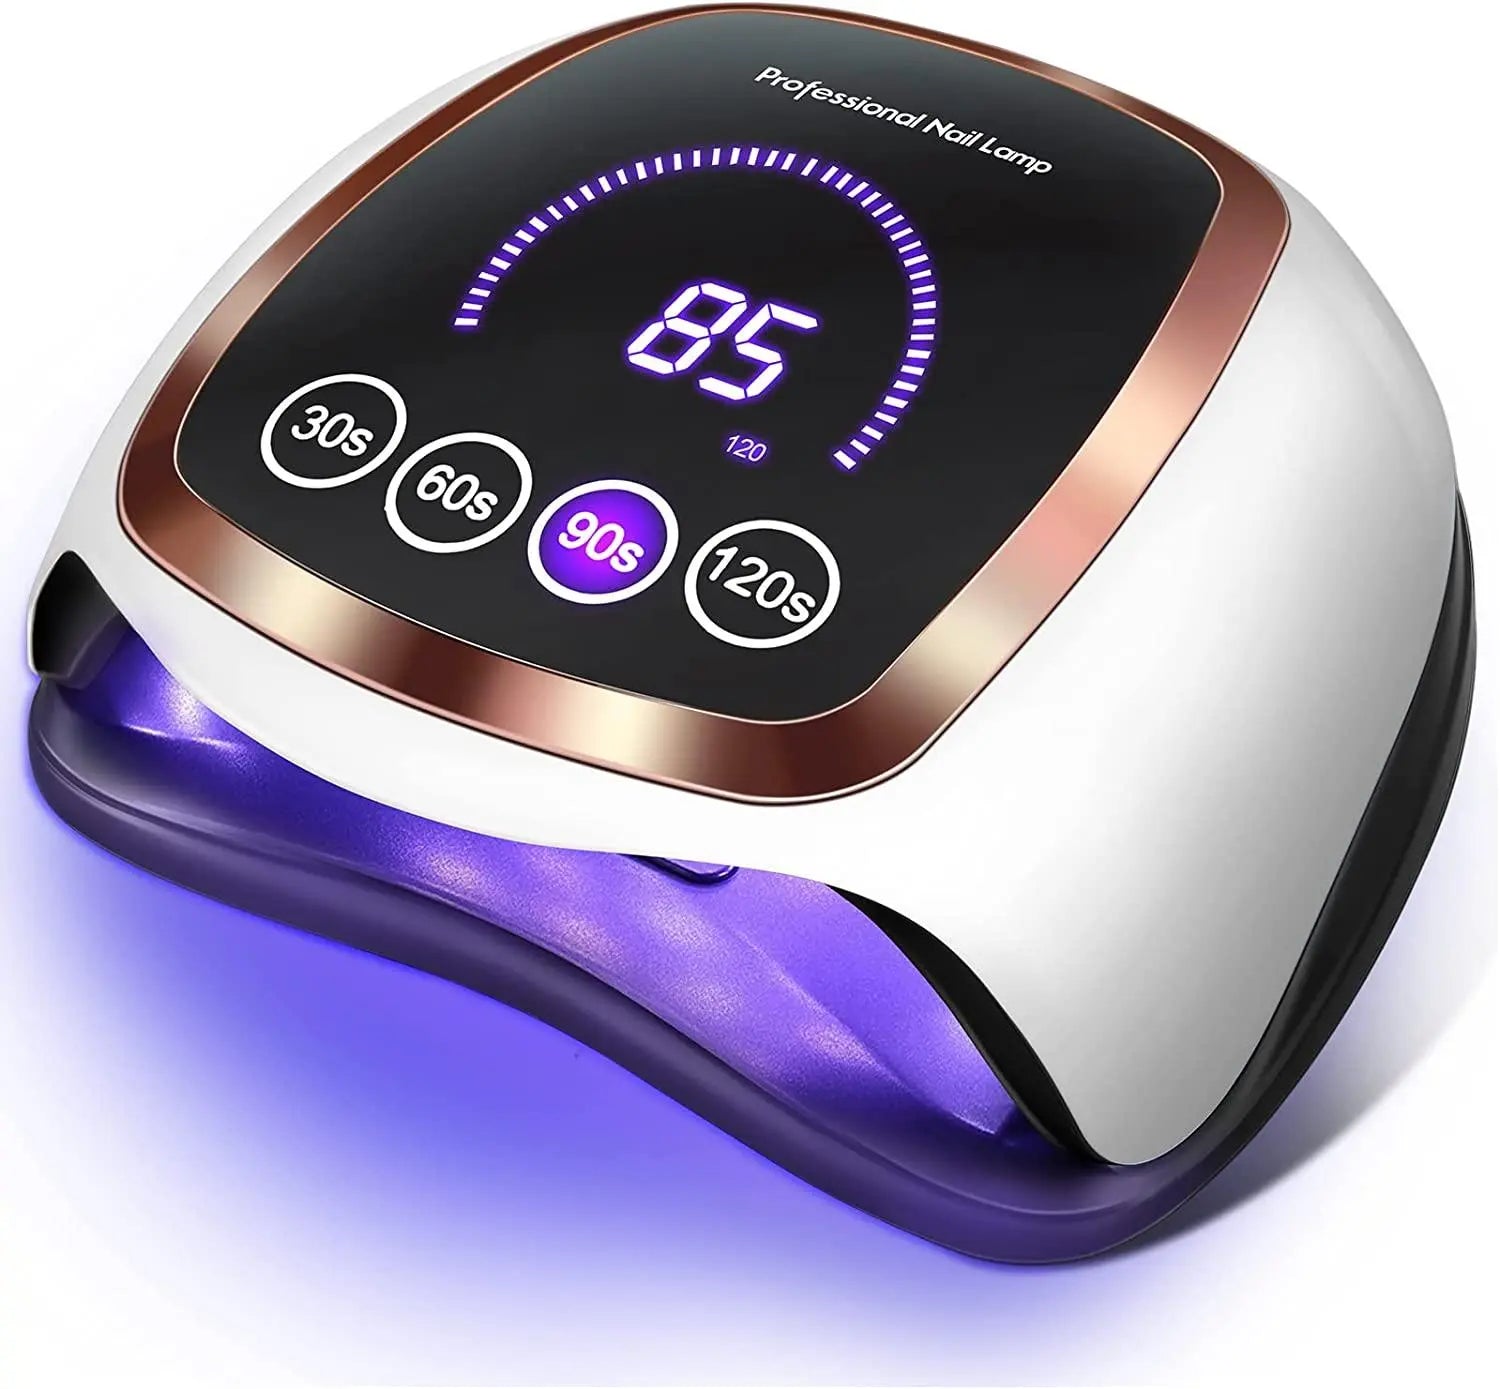 BLUEQUE V3 2 in 1 UV LED Nail Lamp Dryer for Gel Polish 168W with 4 Timer Settings Auto Sensor and LCD Touch Screen for Salon and Home Use - JOLIE'S UAE